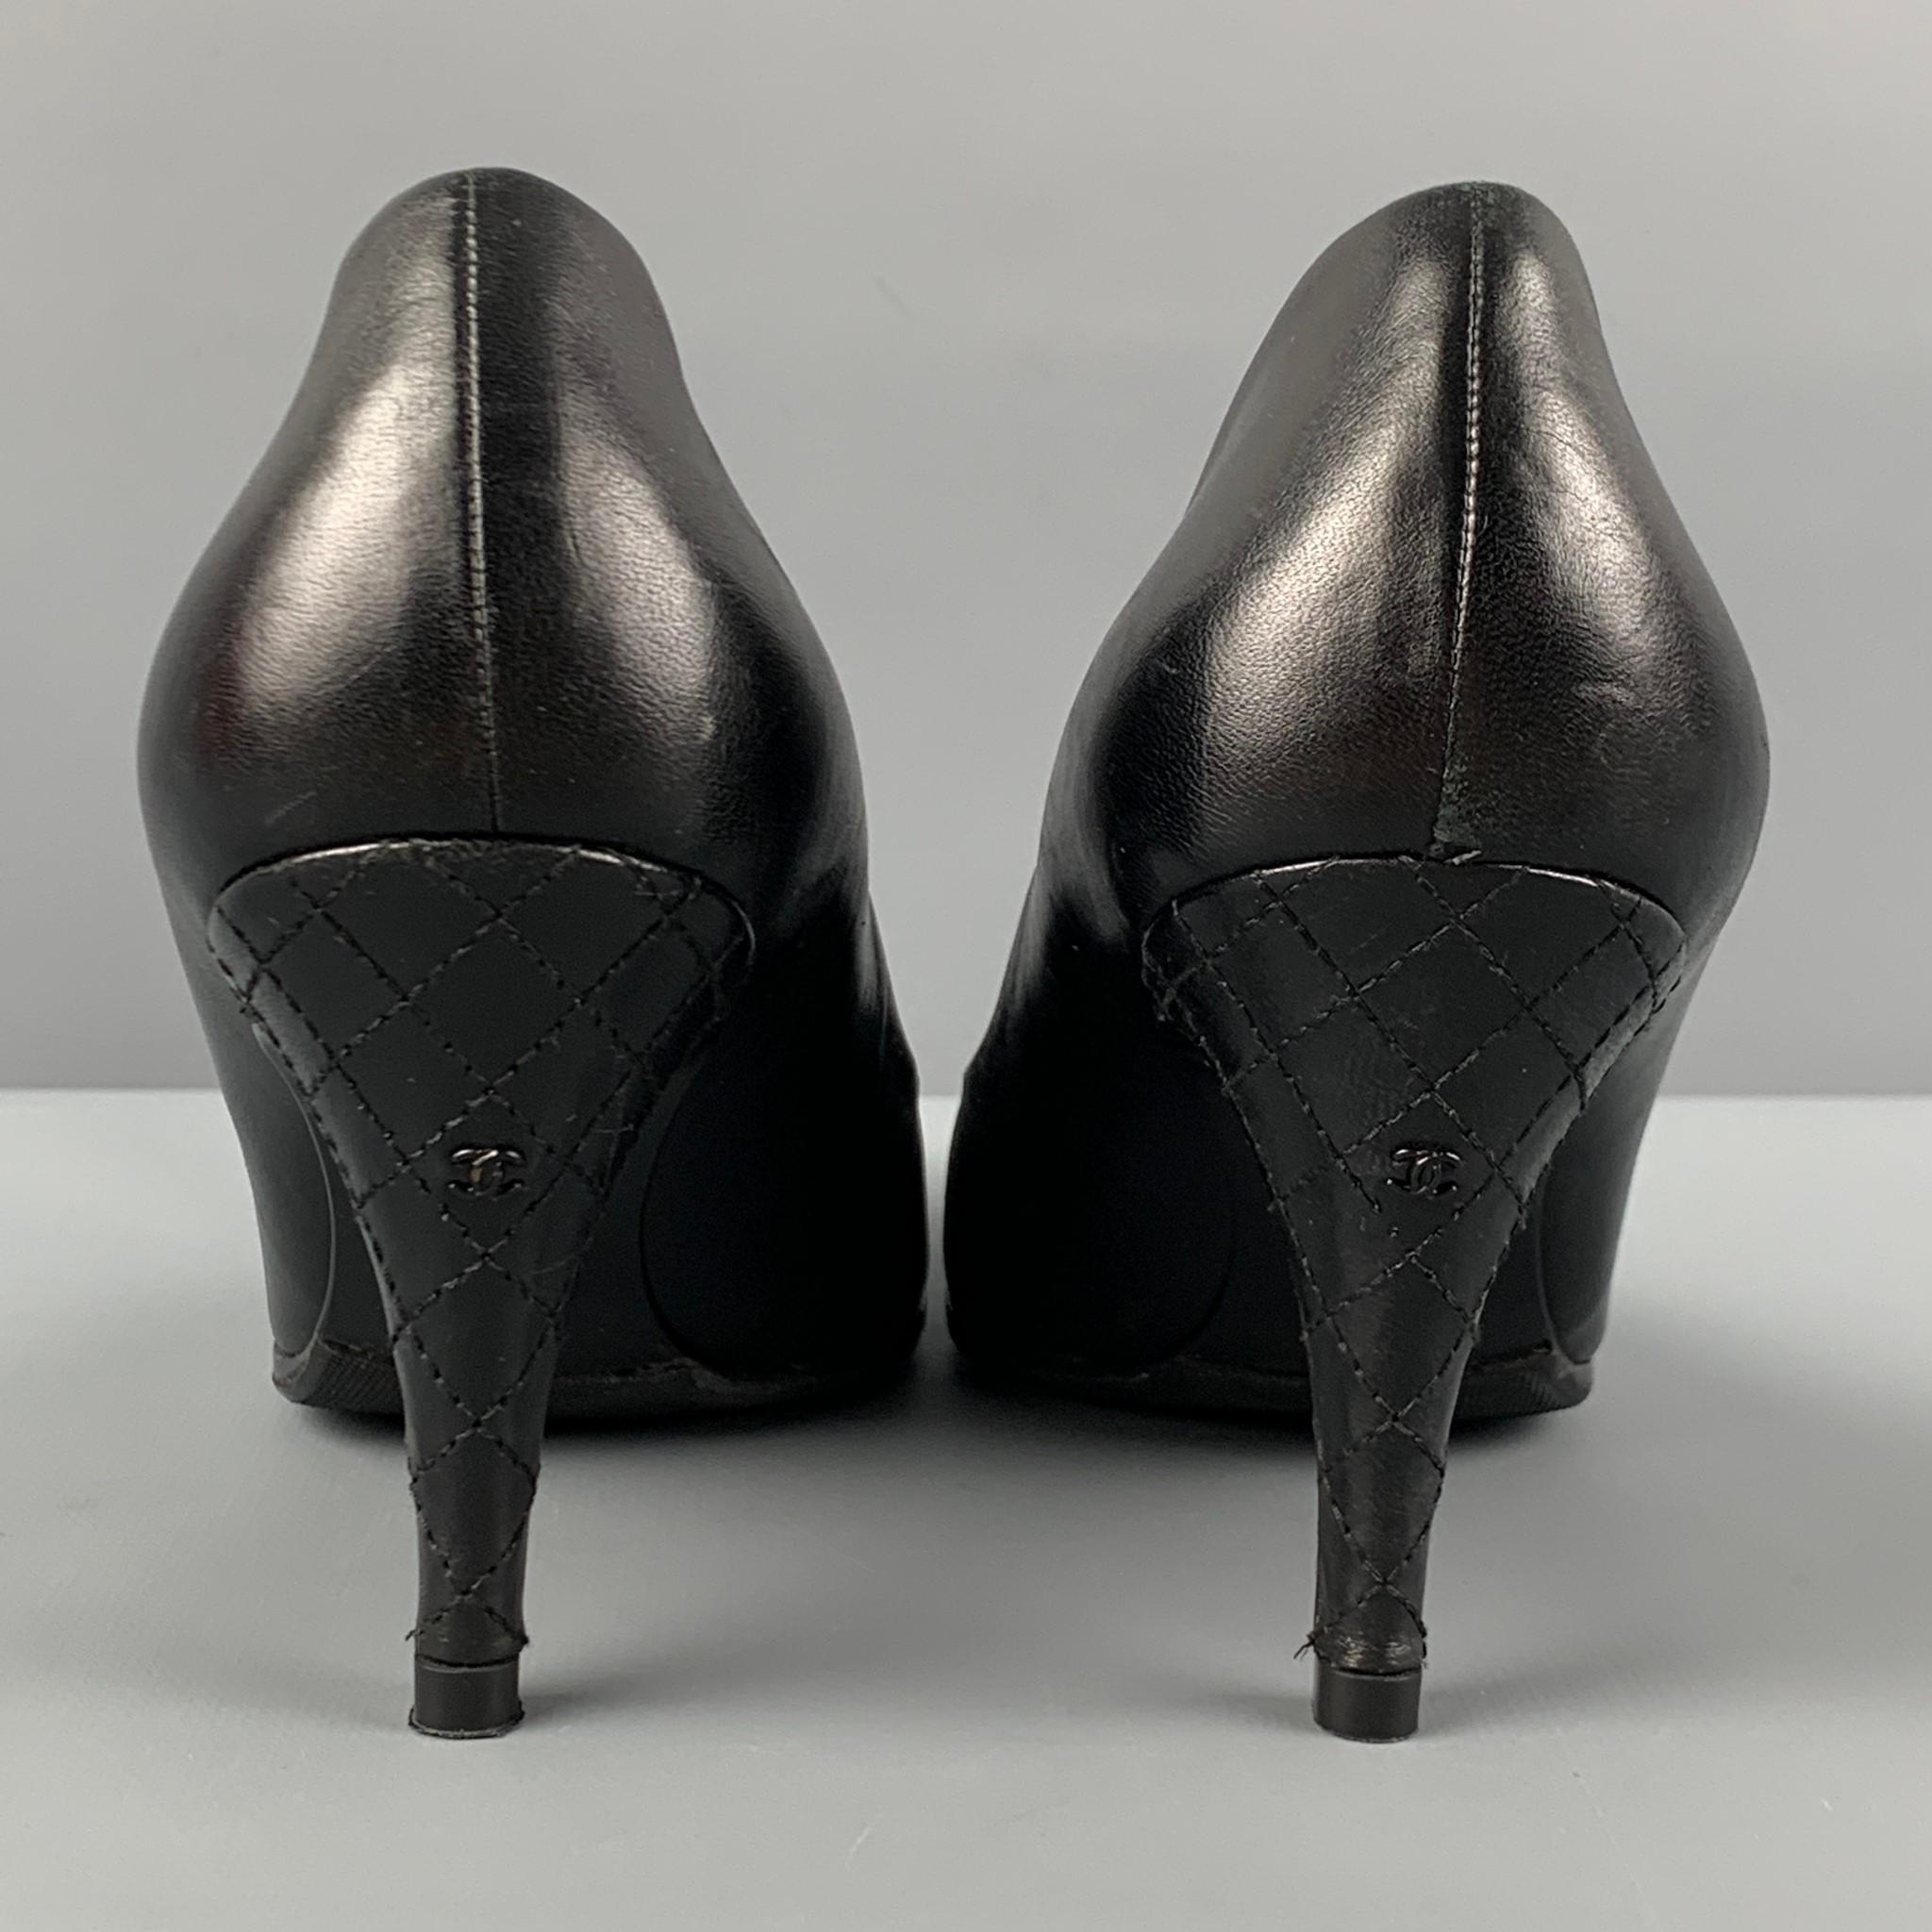 CHANEL Size 7 Black Leather Pointed Toe Pumps 1